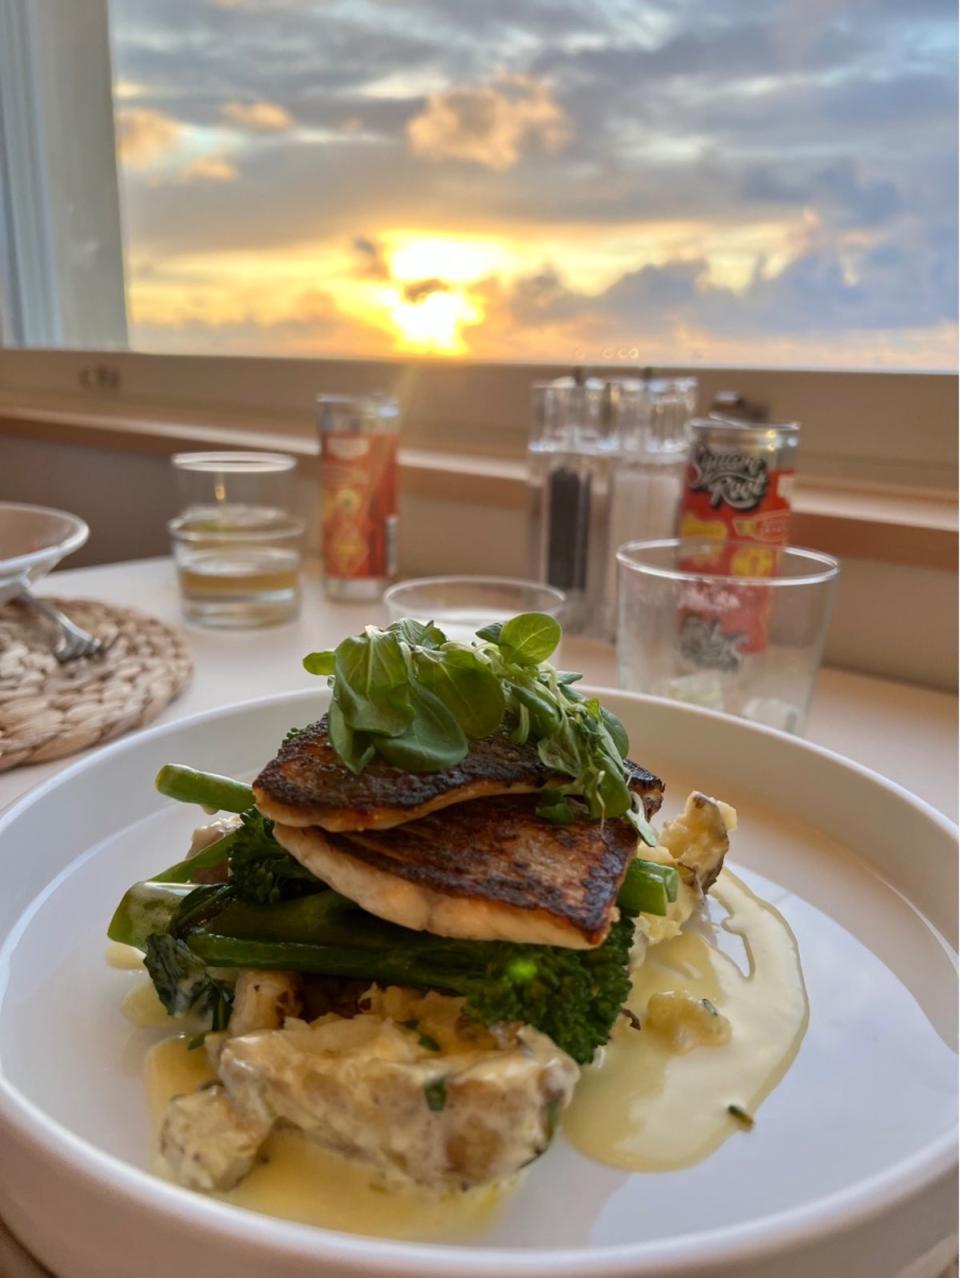 Seabass and sunset for dinner at Nude Dunes (Antonia Windsor)